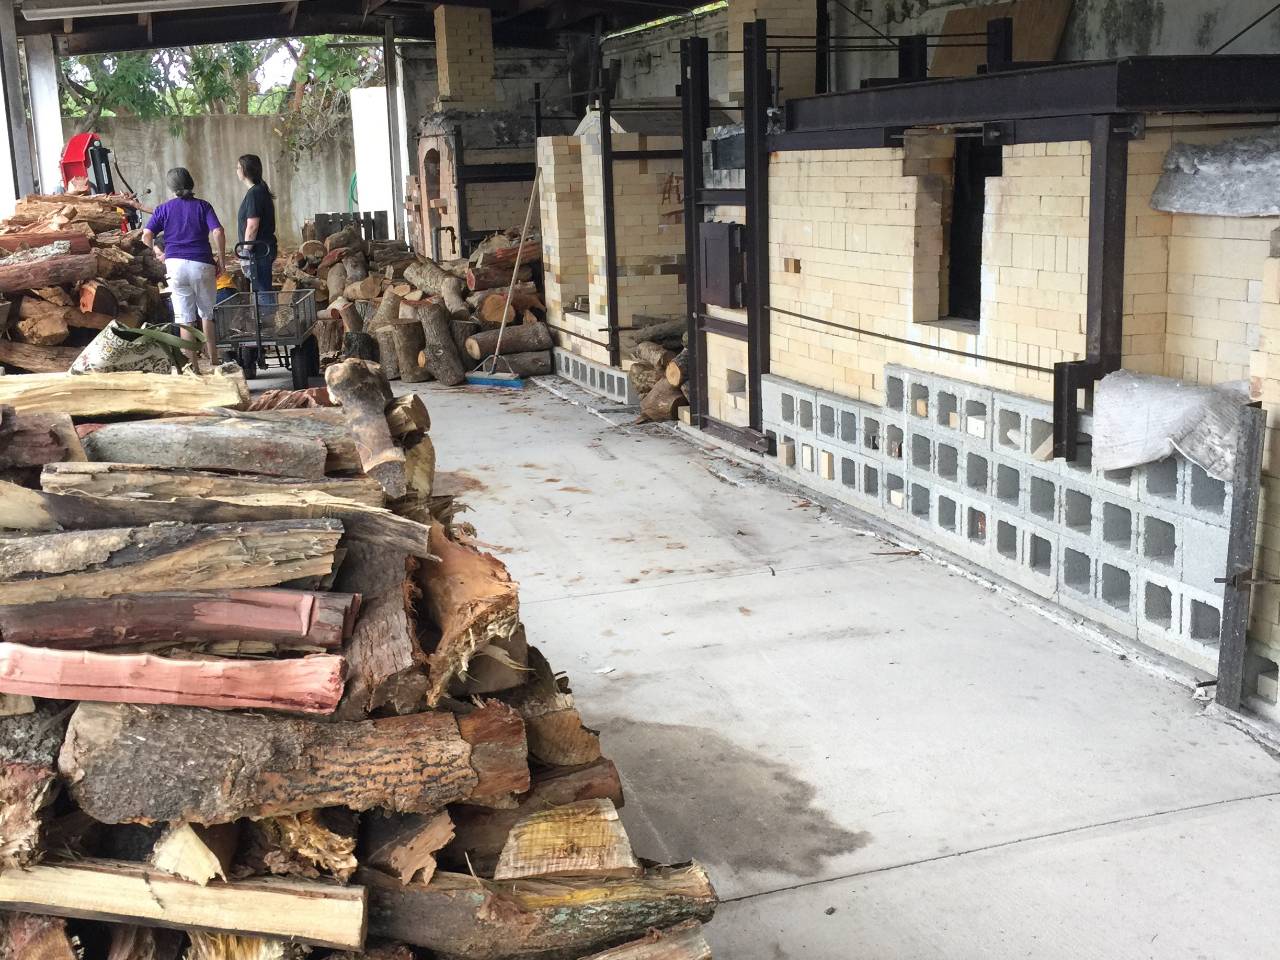 Wood Salvaged from Hurricane Irma to be Used for Artist Workshop